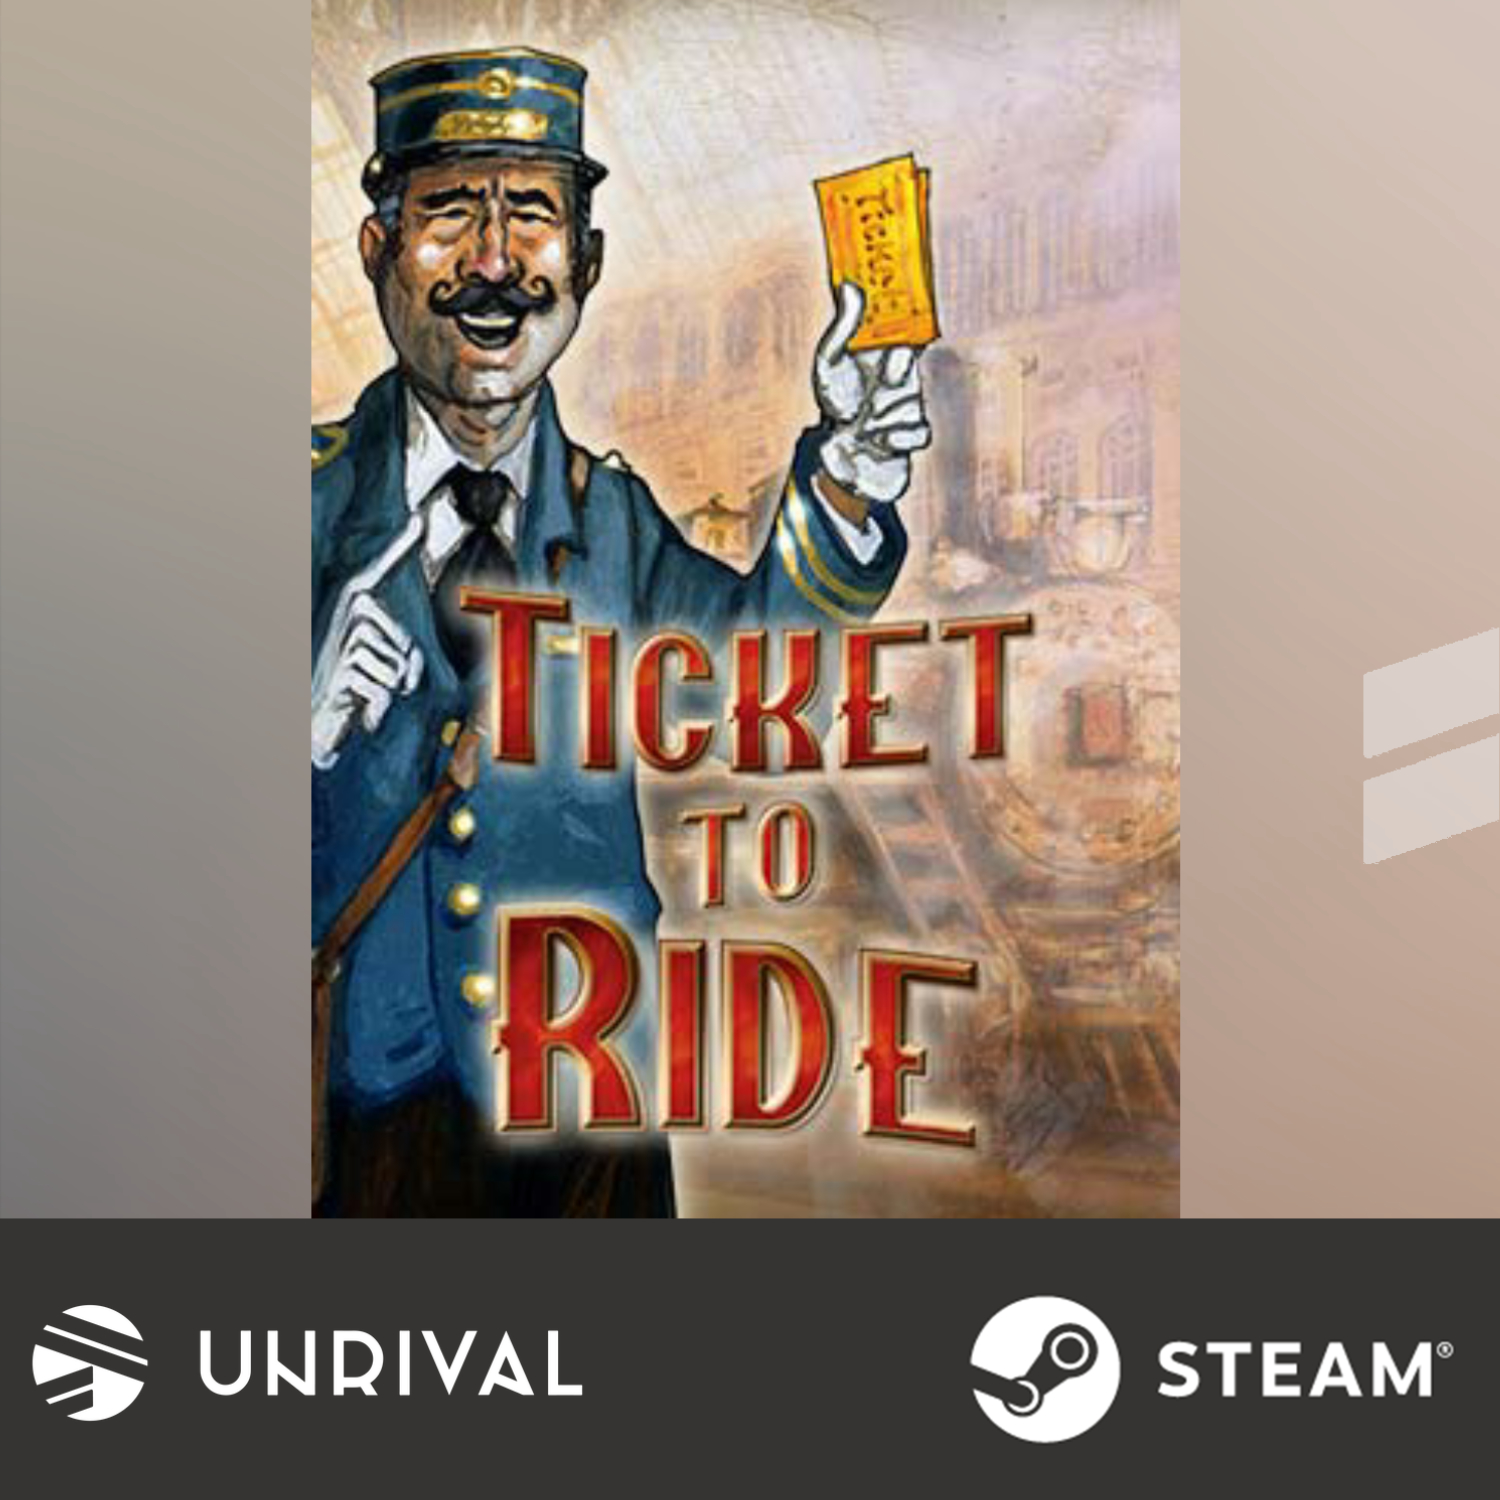 Ticket to Ride PC Digital Download Game - Unrival